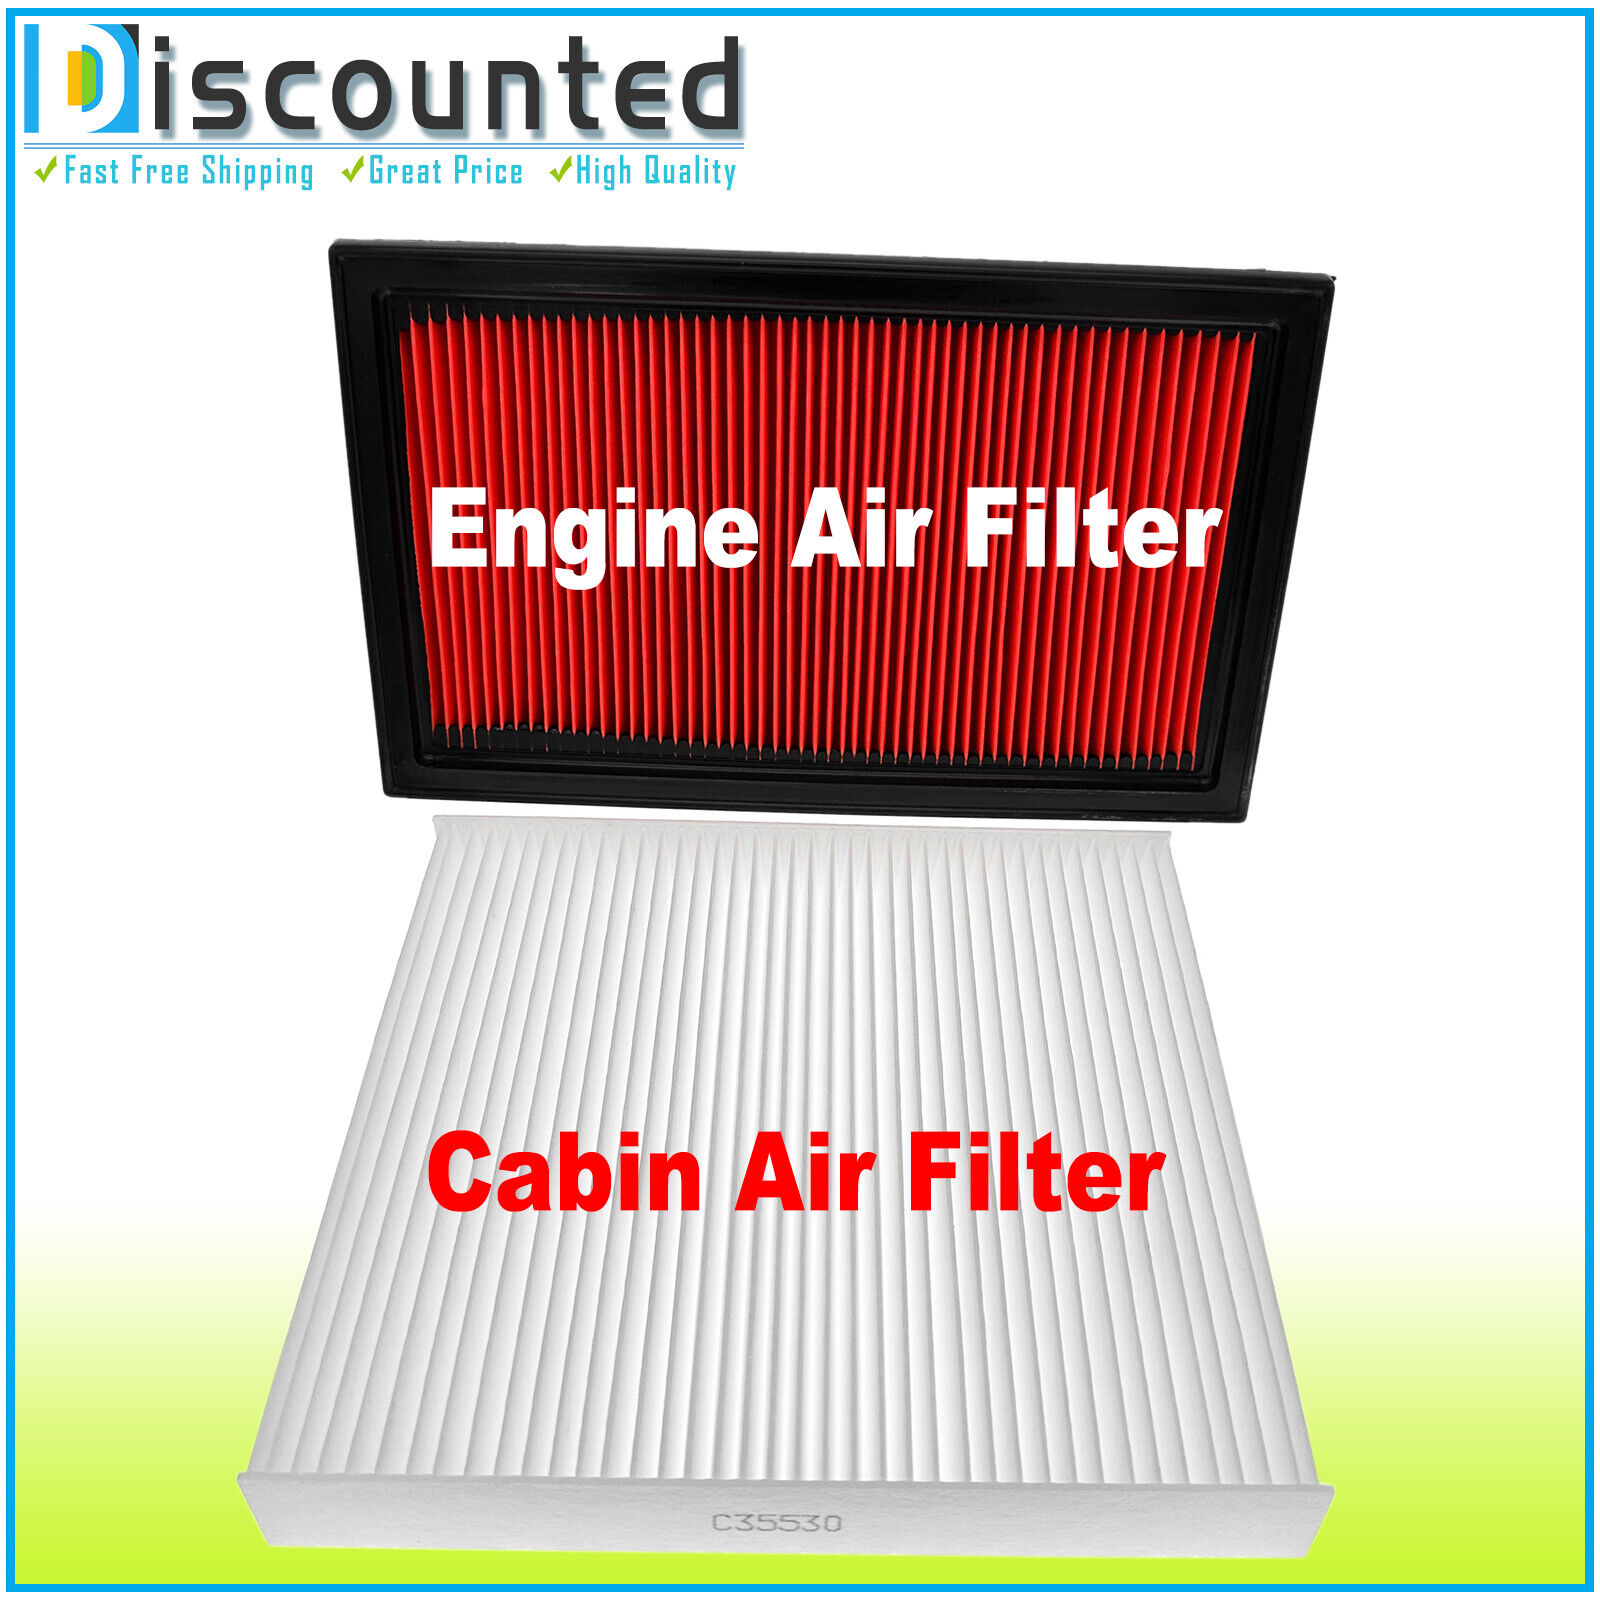 Engine&Cabin Air Filter Combo Set for 2014 - 2020 INFINITI QX60 3.5L V6 GAS DOHC